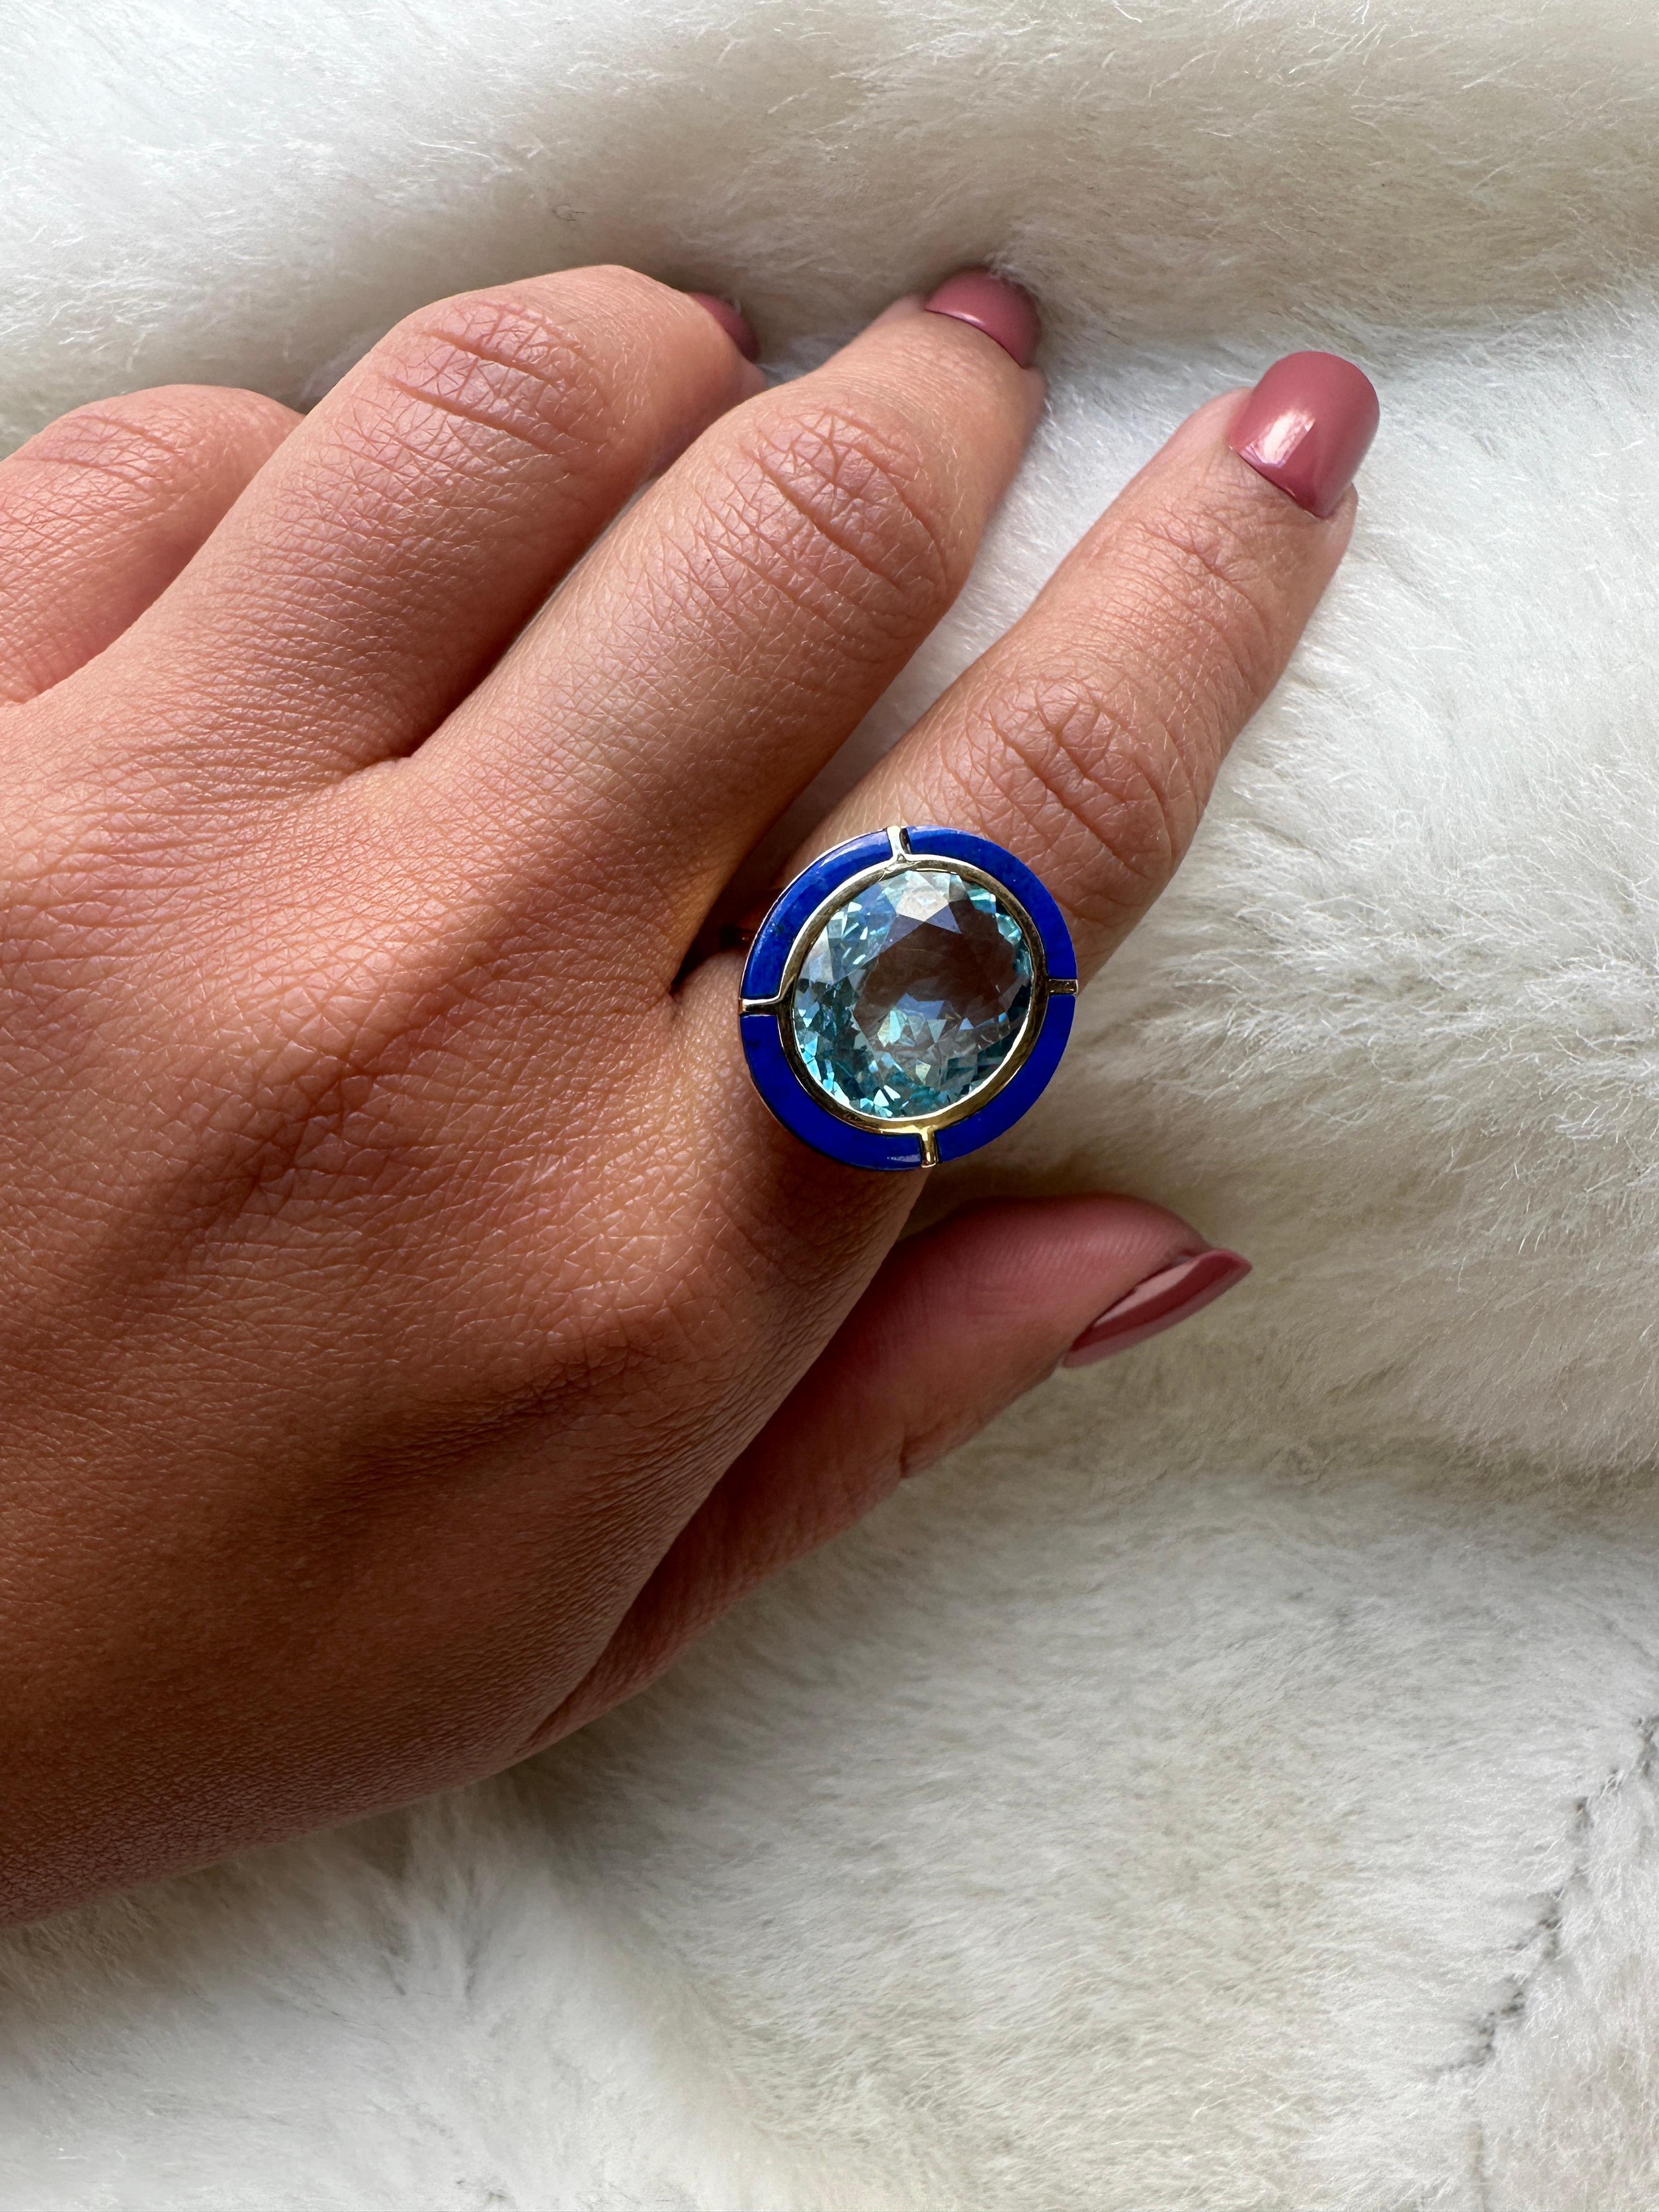 This Blue Topaz & Lapis Lazuli Oval Ring in 18K Yellow Gold is a stunning piece of jewelry from the 'Melange' Collection. This ring features a beautiful combination of blue topaz and lapis lazuli, set in 18K yellow gold. The oval-shaped stones are